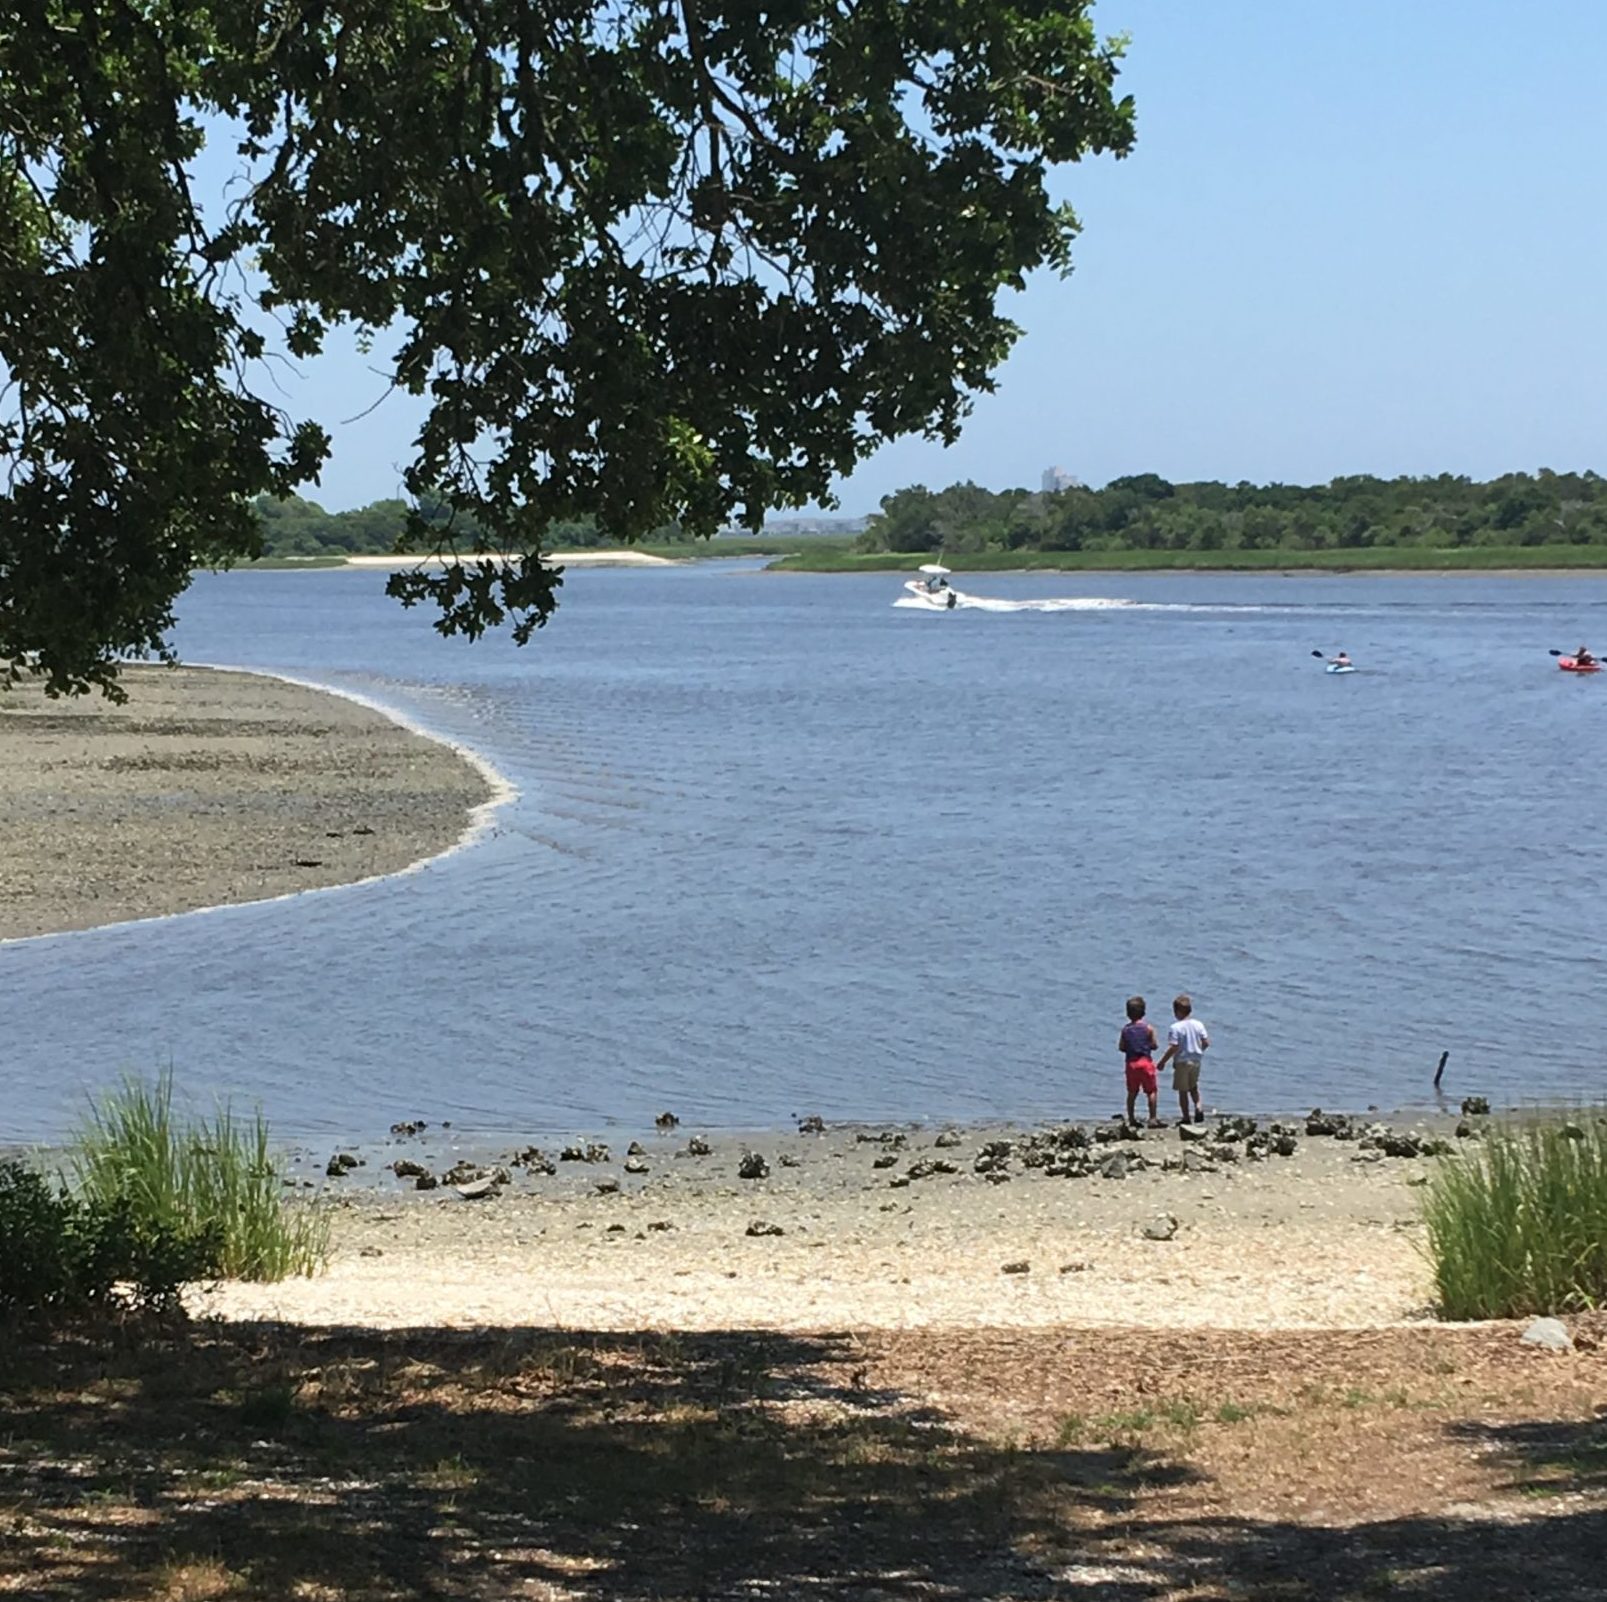 Children playing the sand by the intercoastal waterway